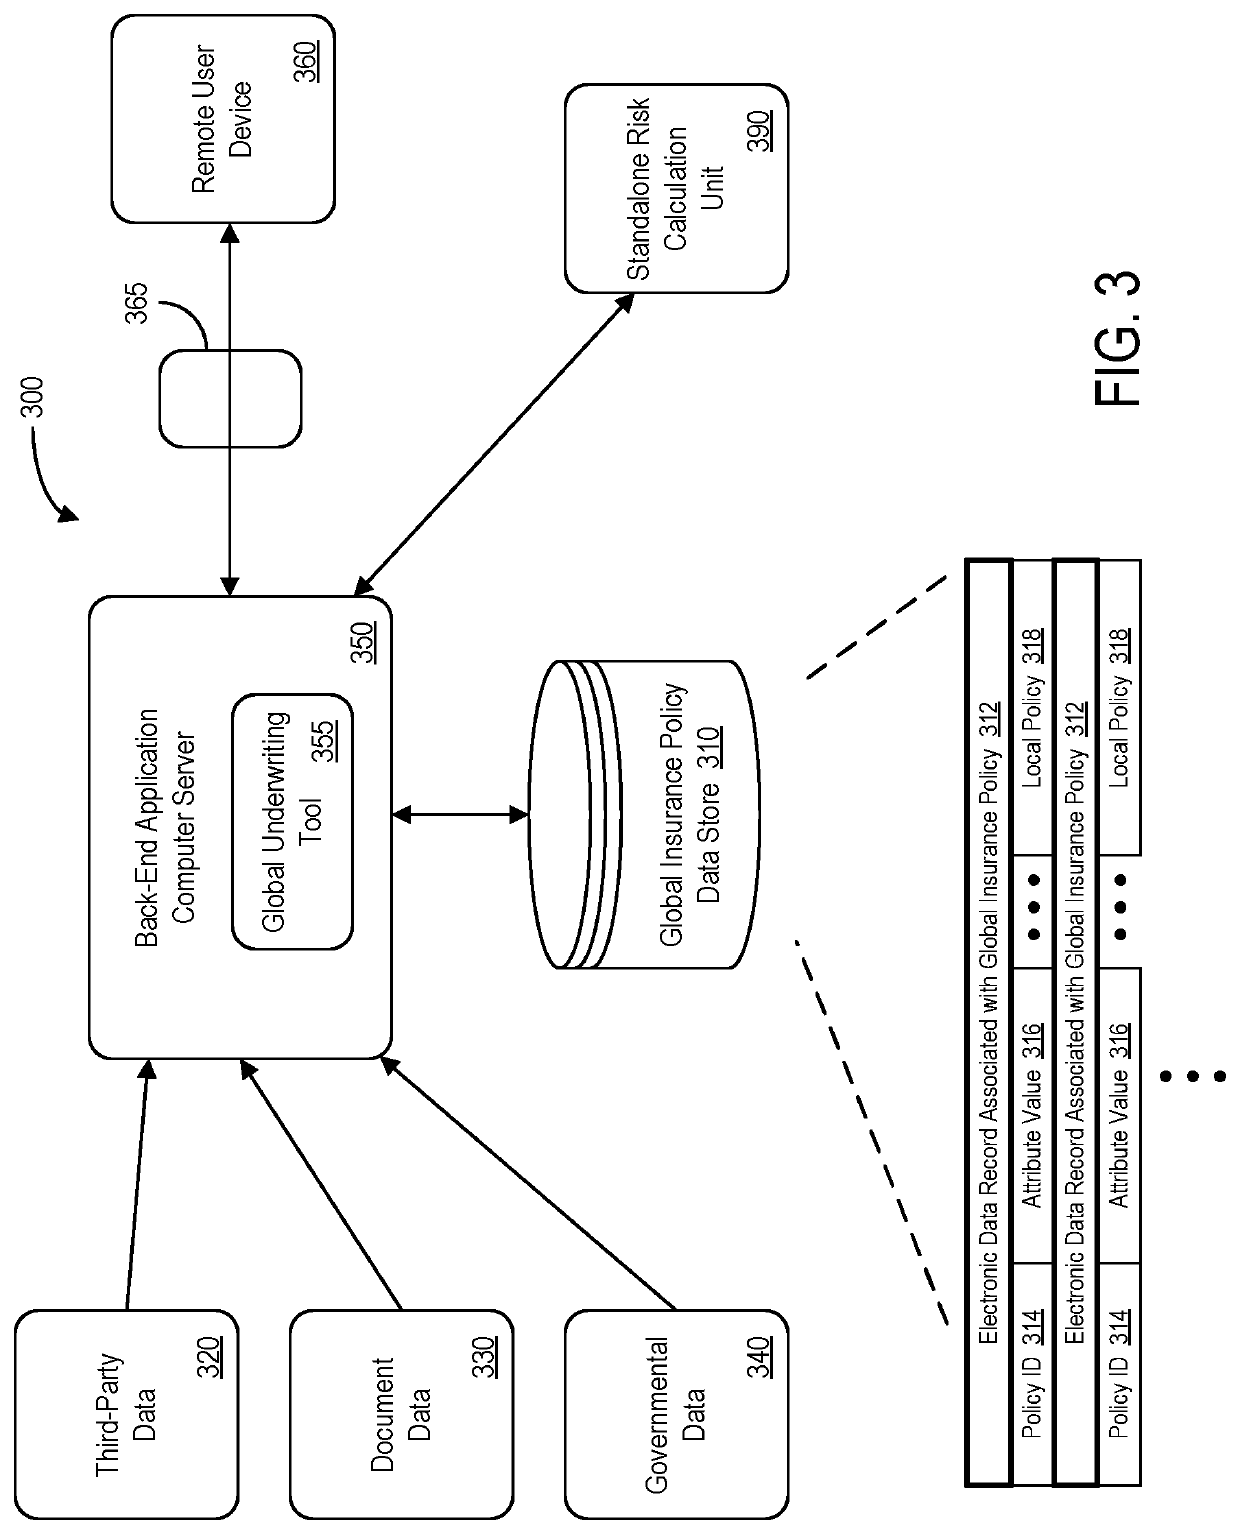 Processing system to facilitate multi-region risk relationships